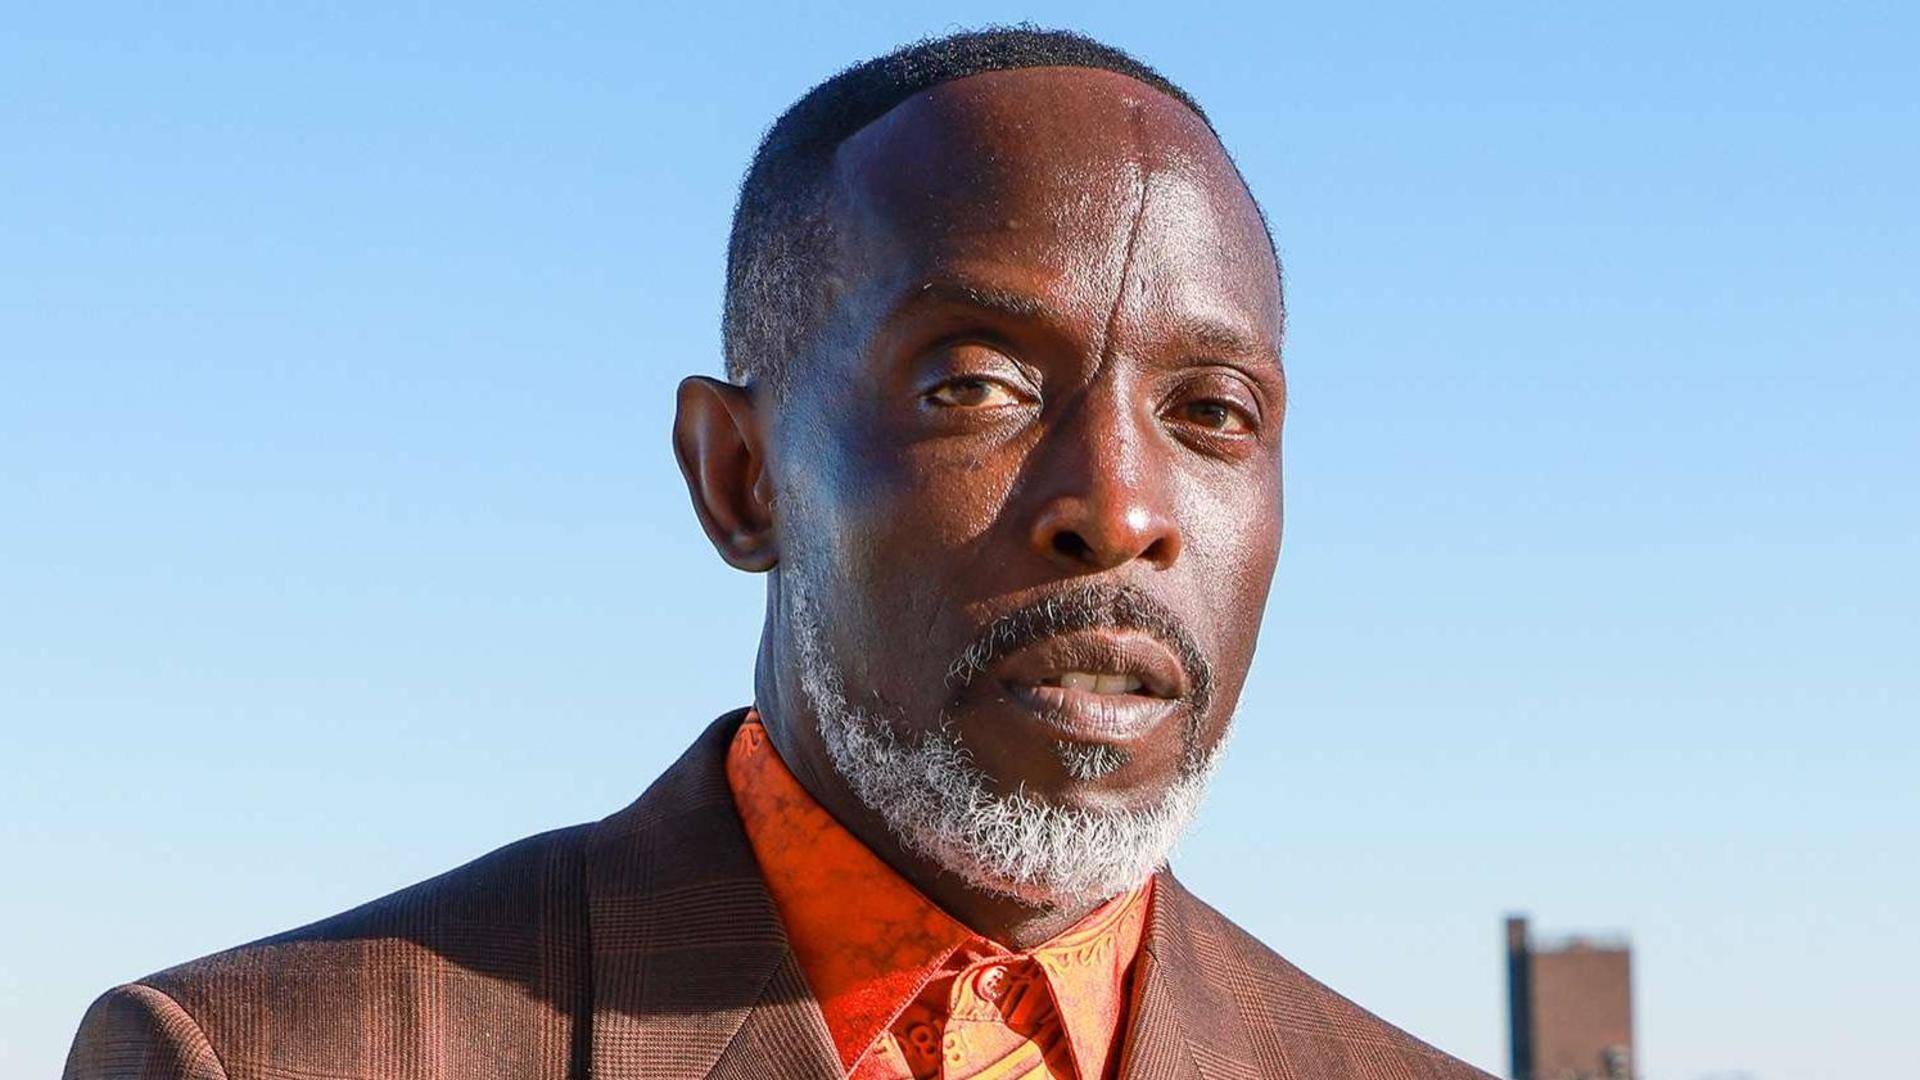 72-year-old man sentenced in connection to Michael K Williams's death